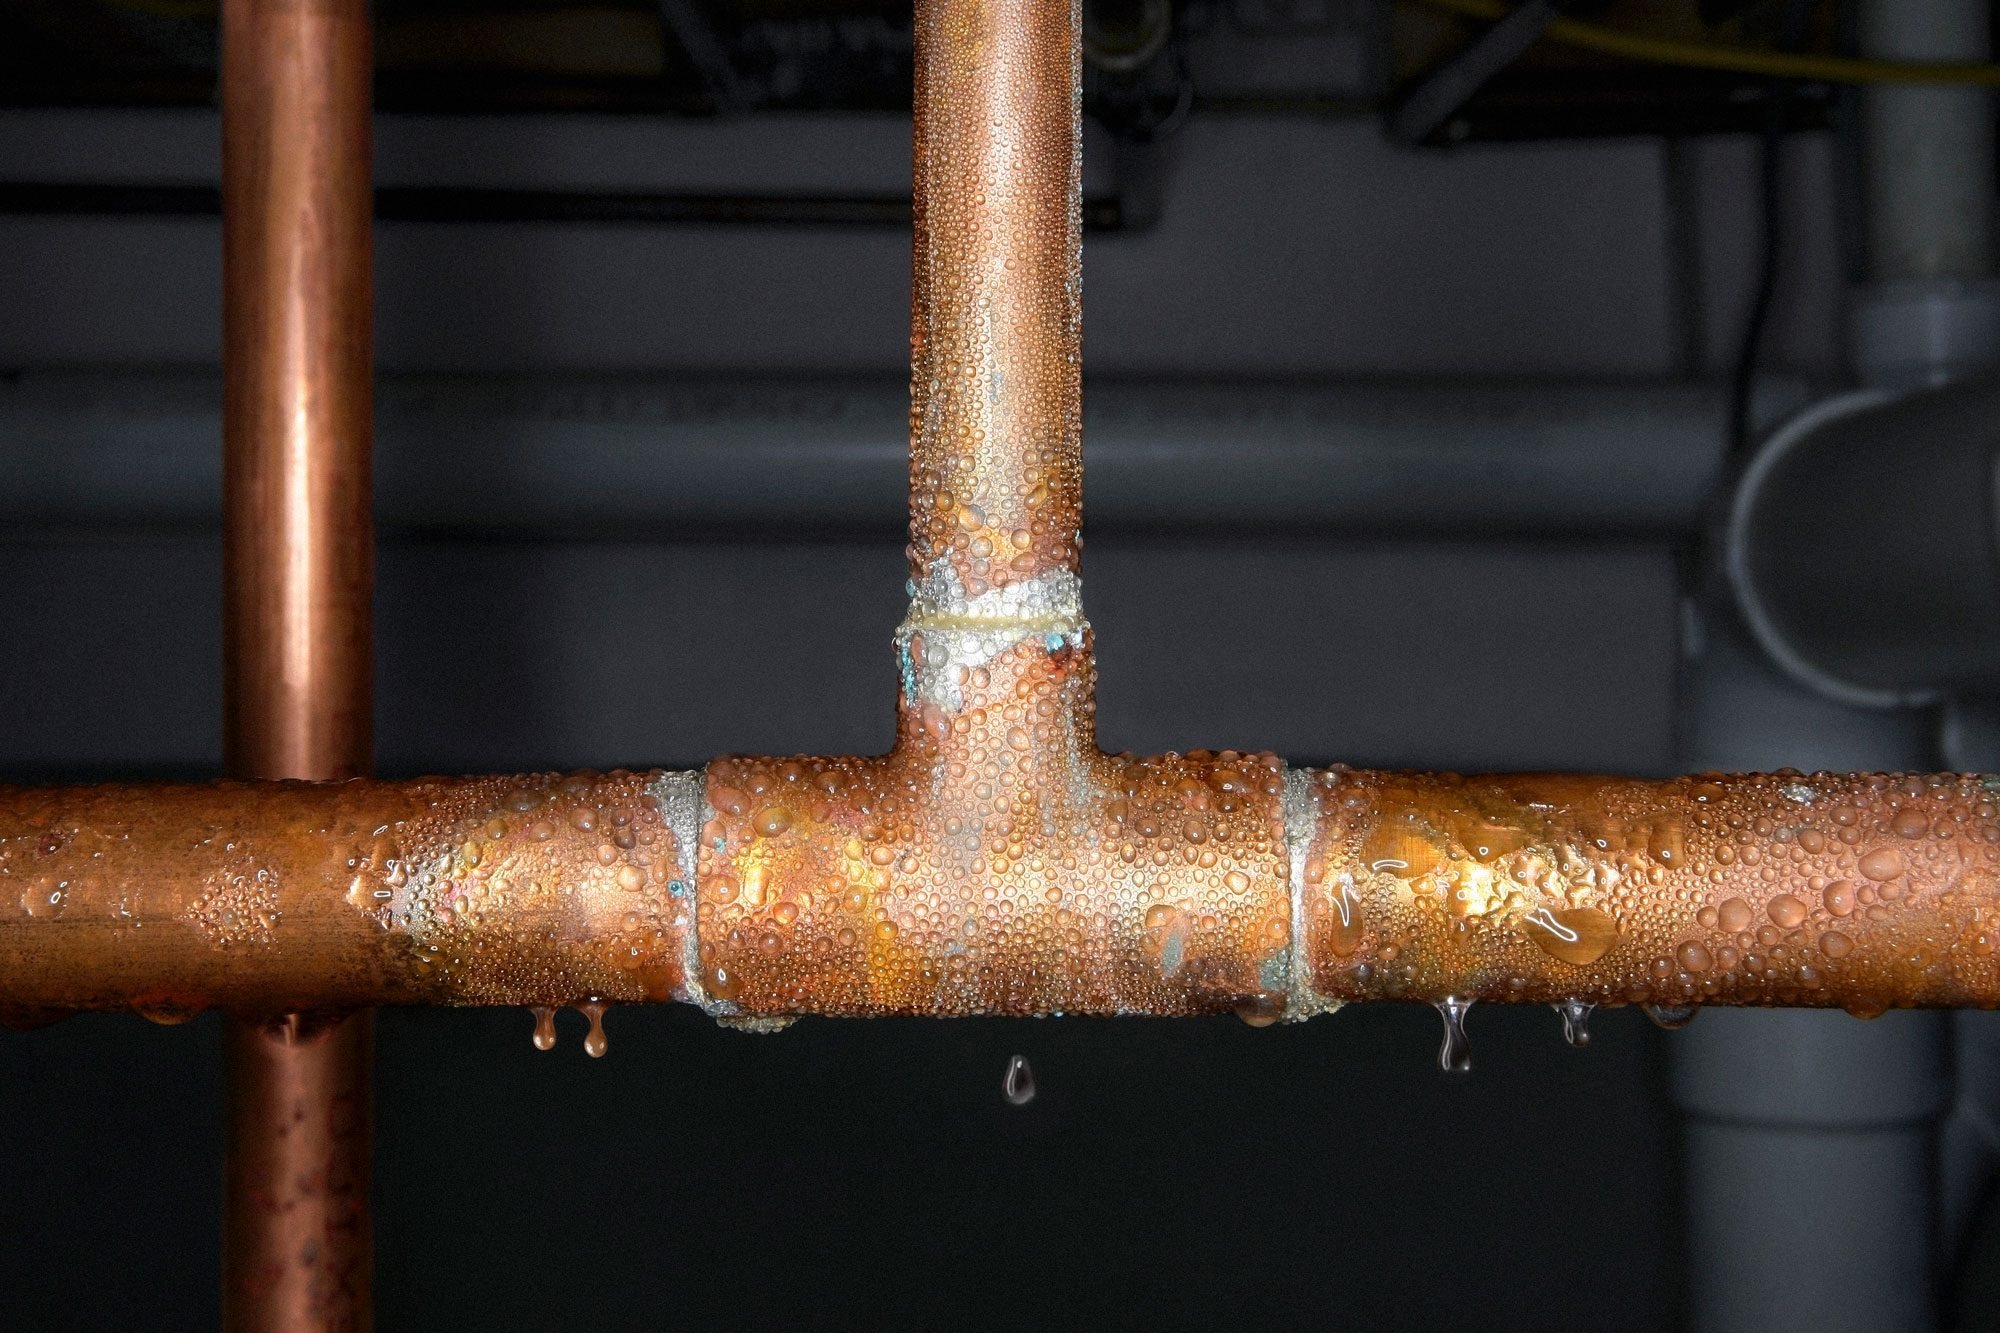 Copper Plumbing Pipe Sweating Water; condensation on copper pipe